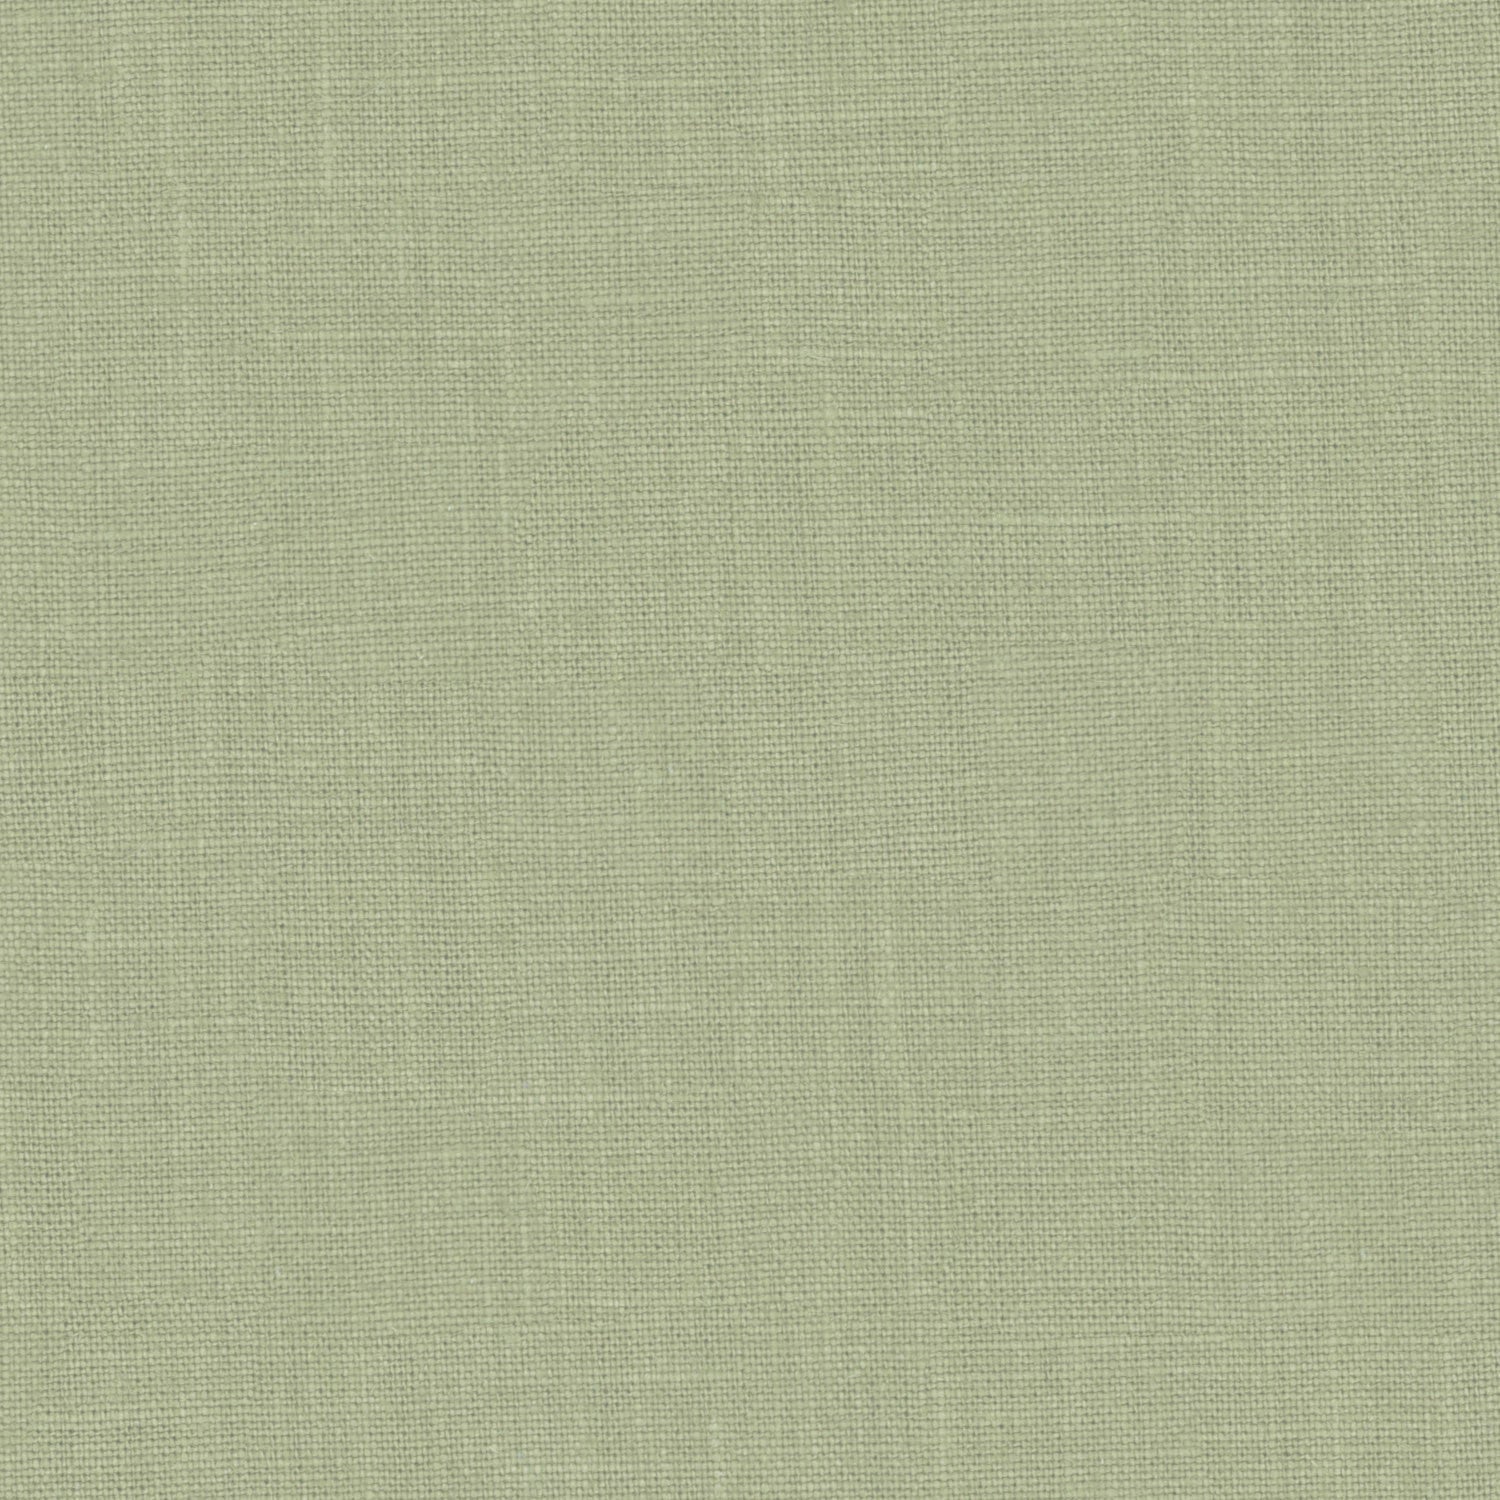 CAMPBELL Celadon Woven Fabric - Warner House